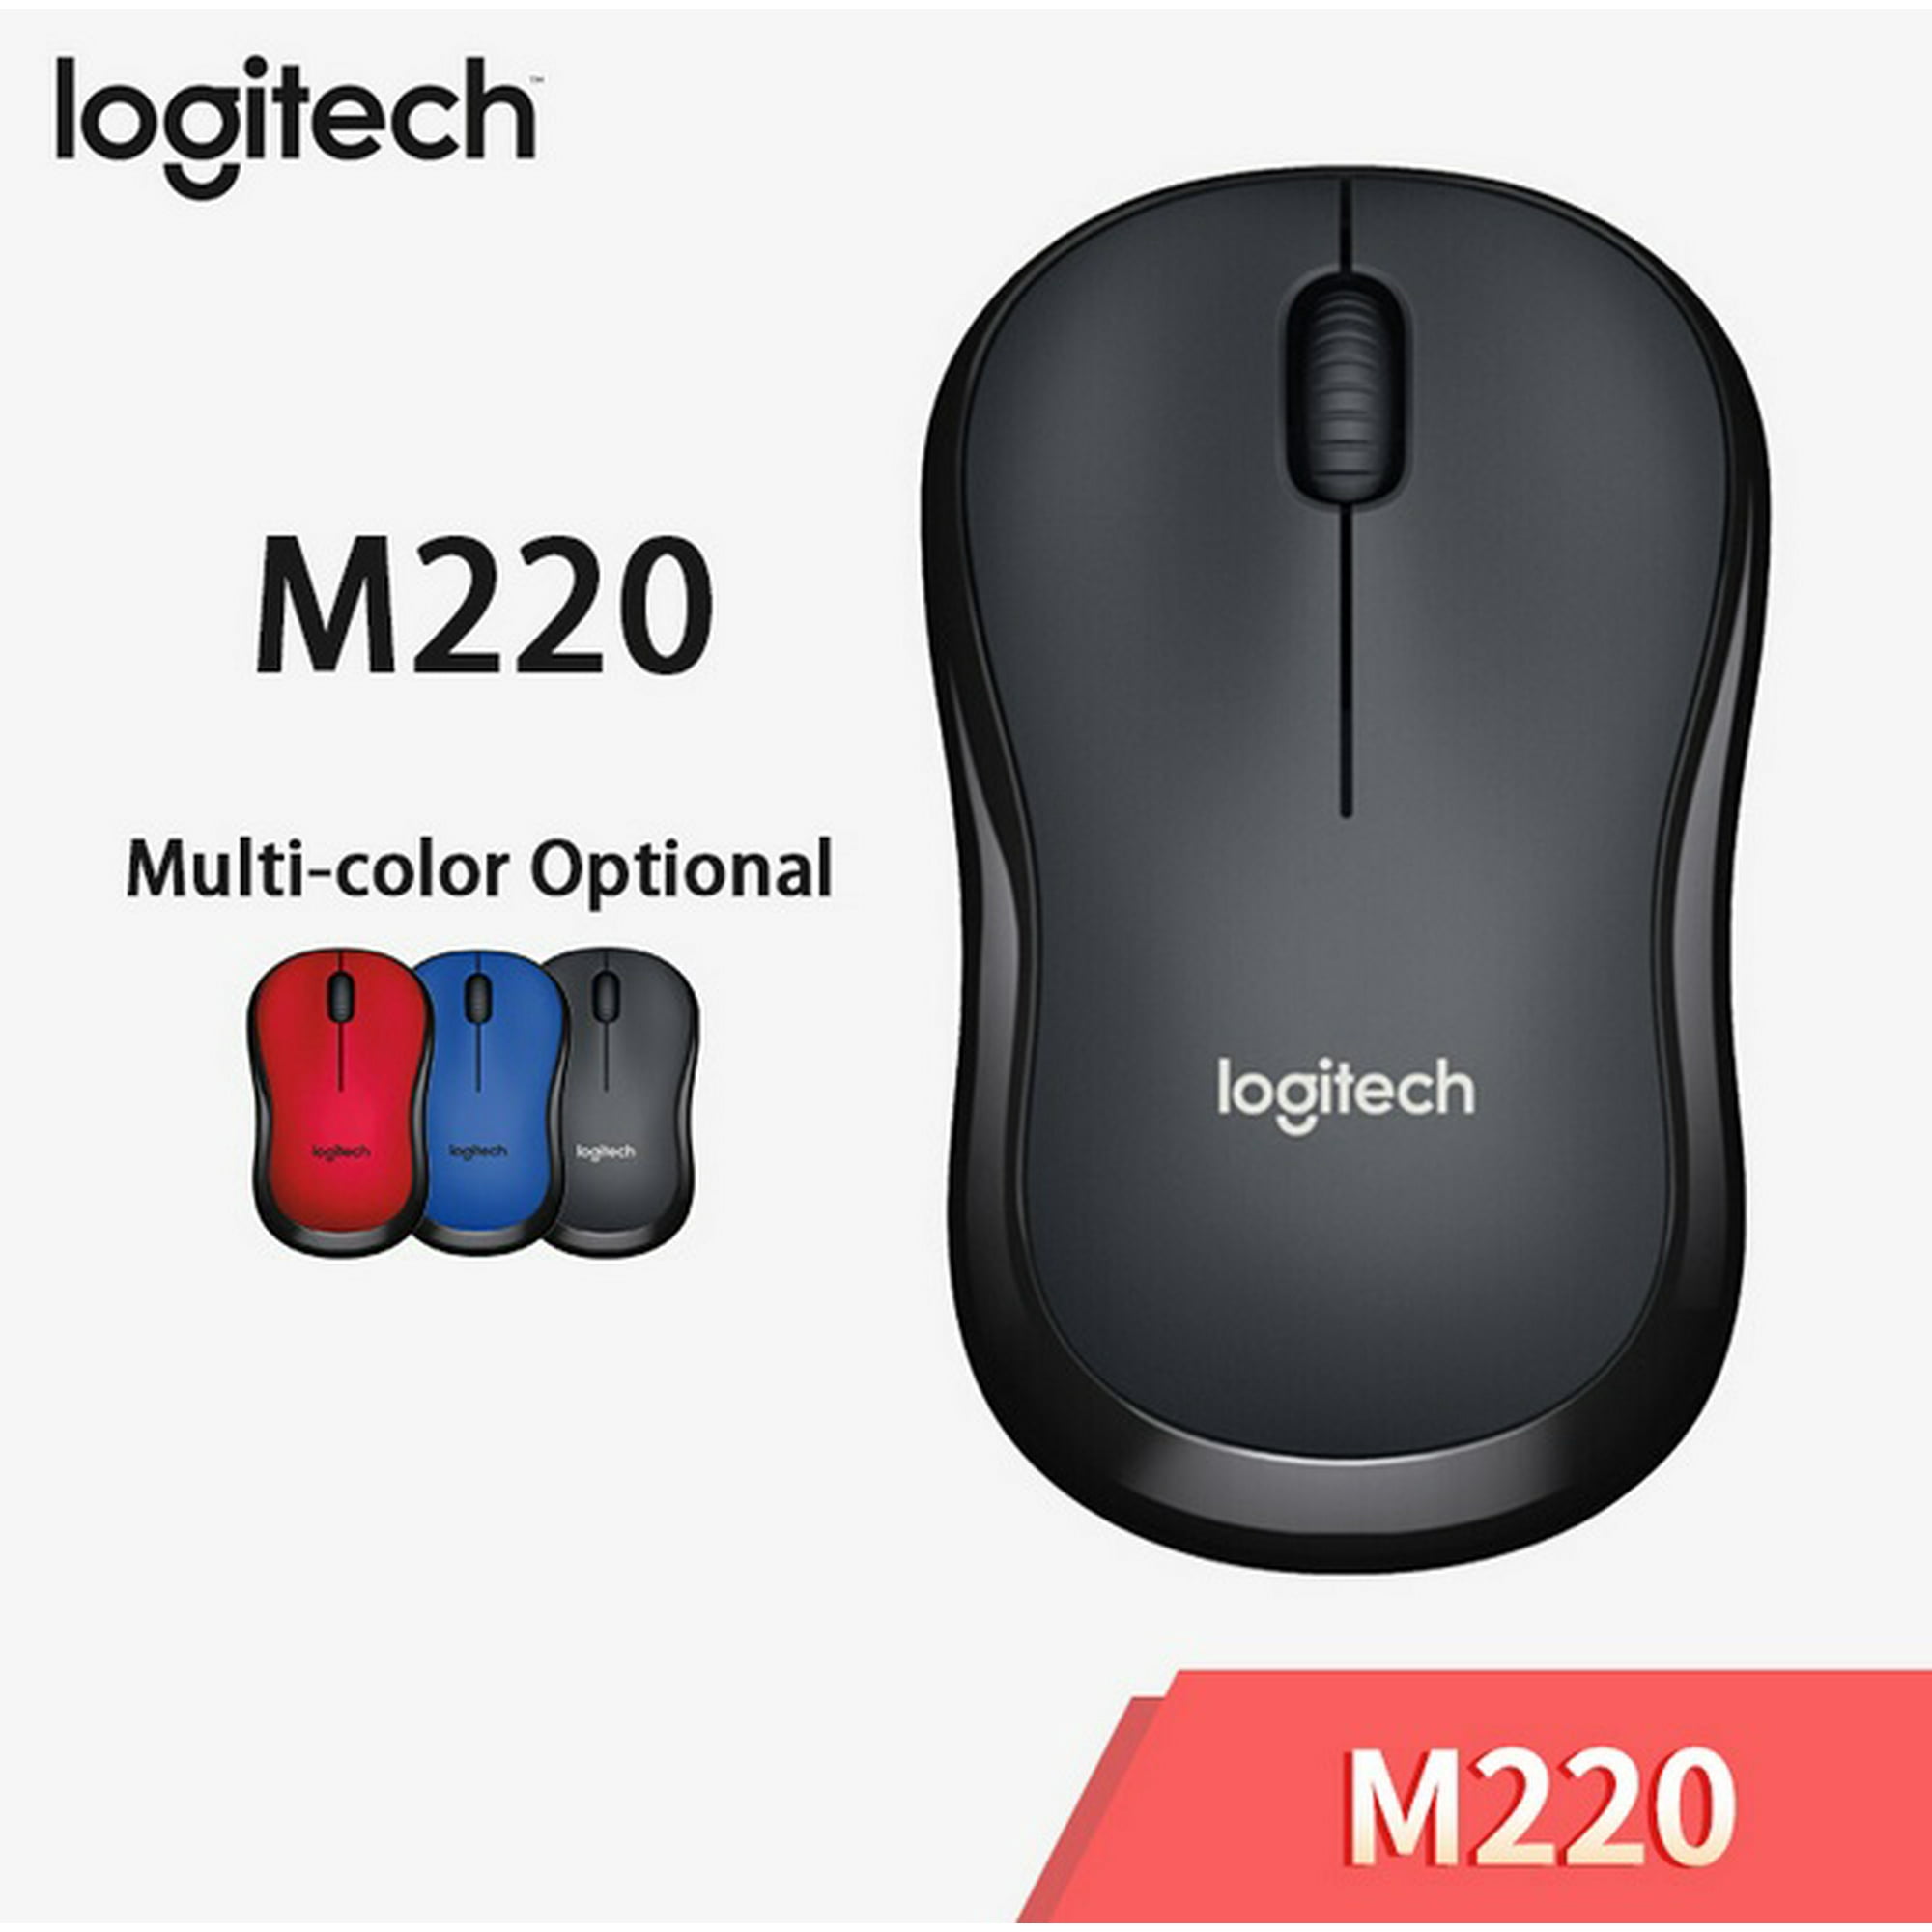 Logitech M220 Wireless Mouse Silent with 2.4GHz High-Quality Optical Ergonomic PC Gaming Mouse for Mac OS/Window 10/8/7 Color:Grey M220 mute | Walmart